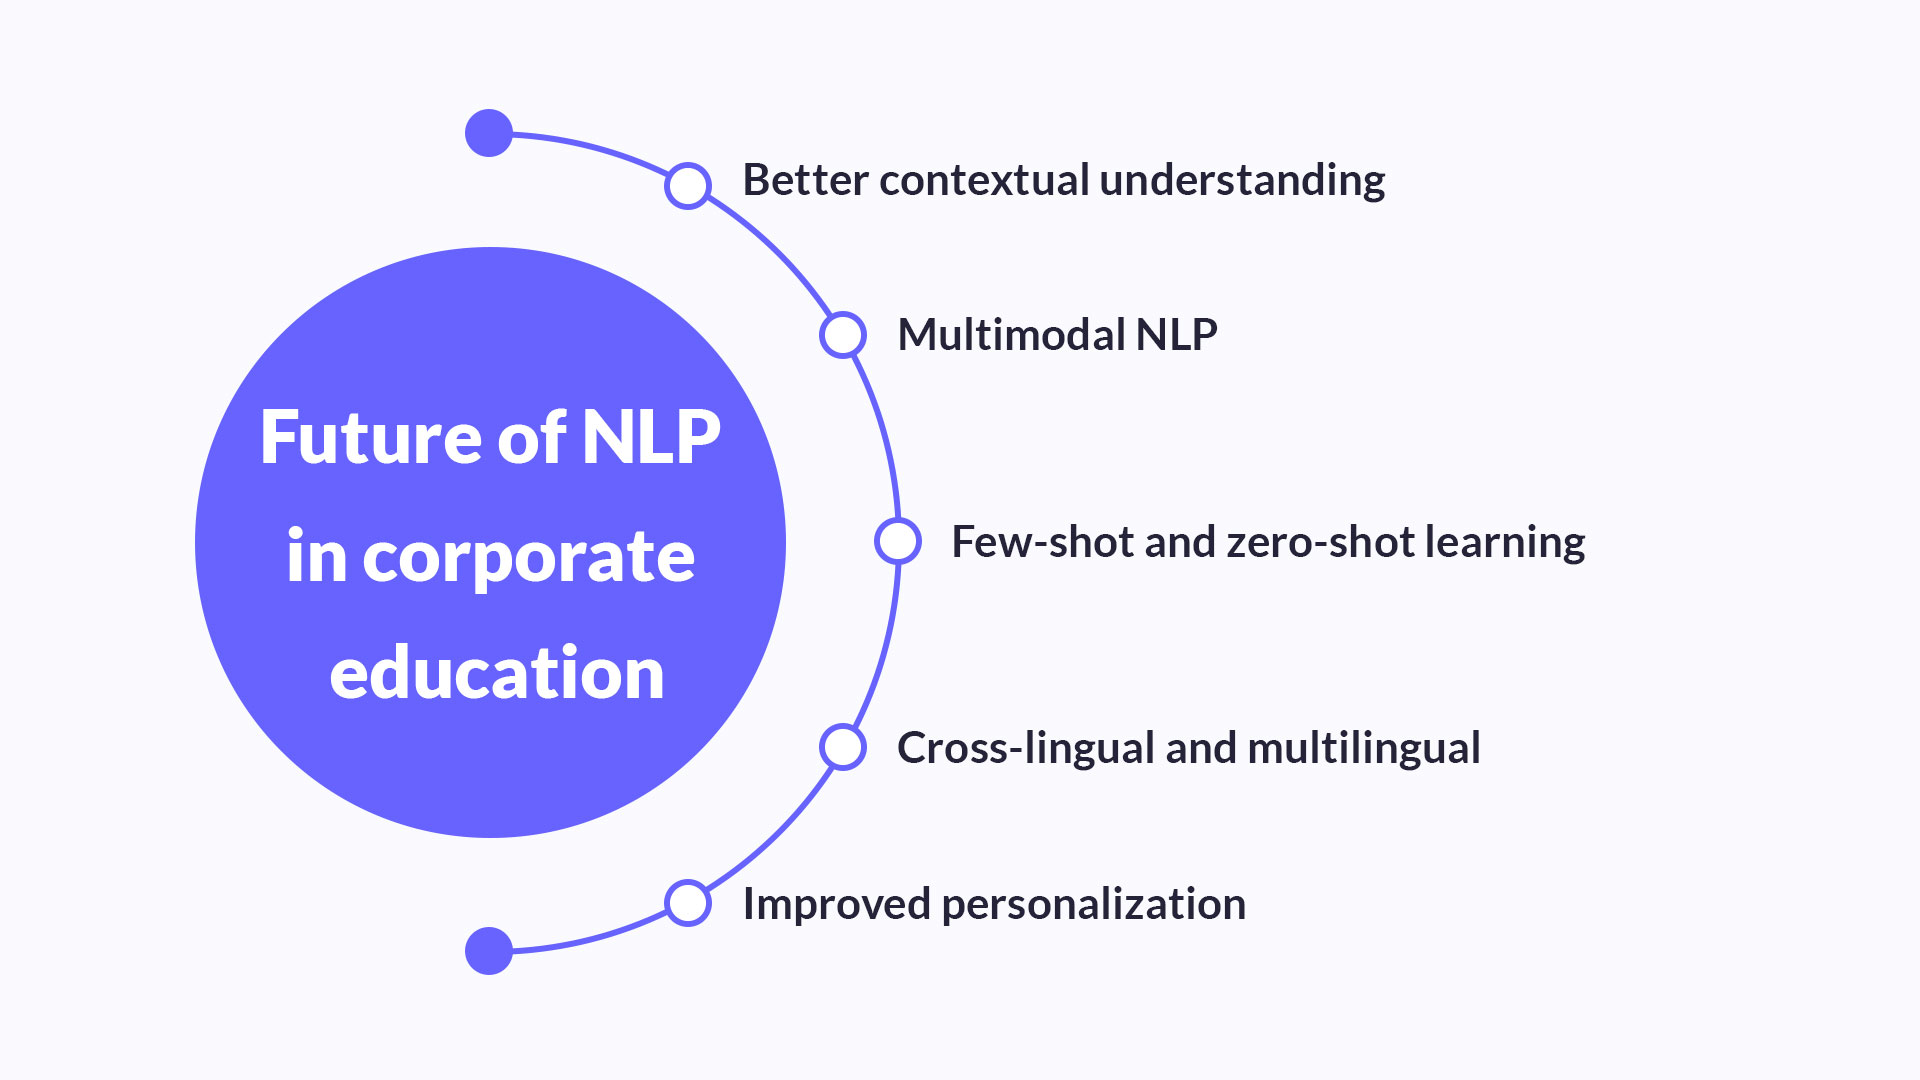 Future of NLP in corporate education